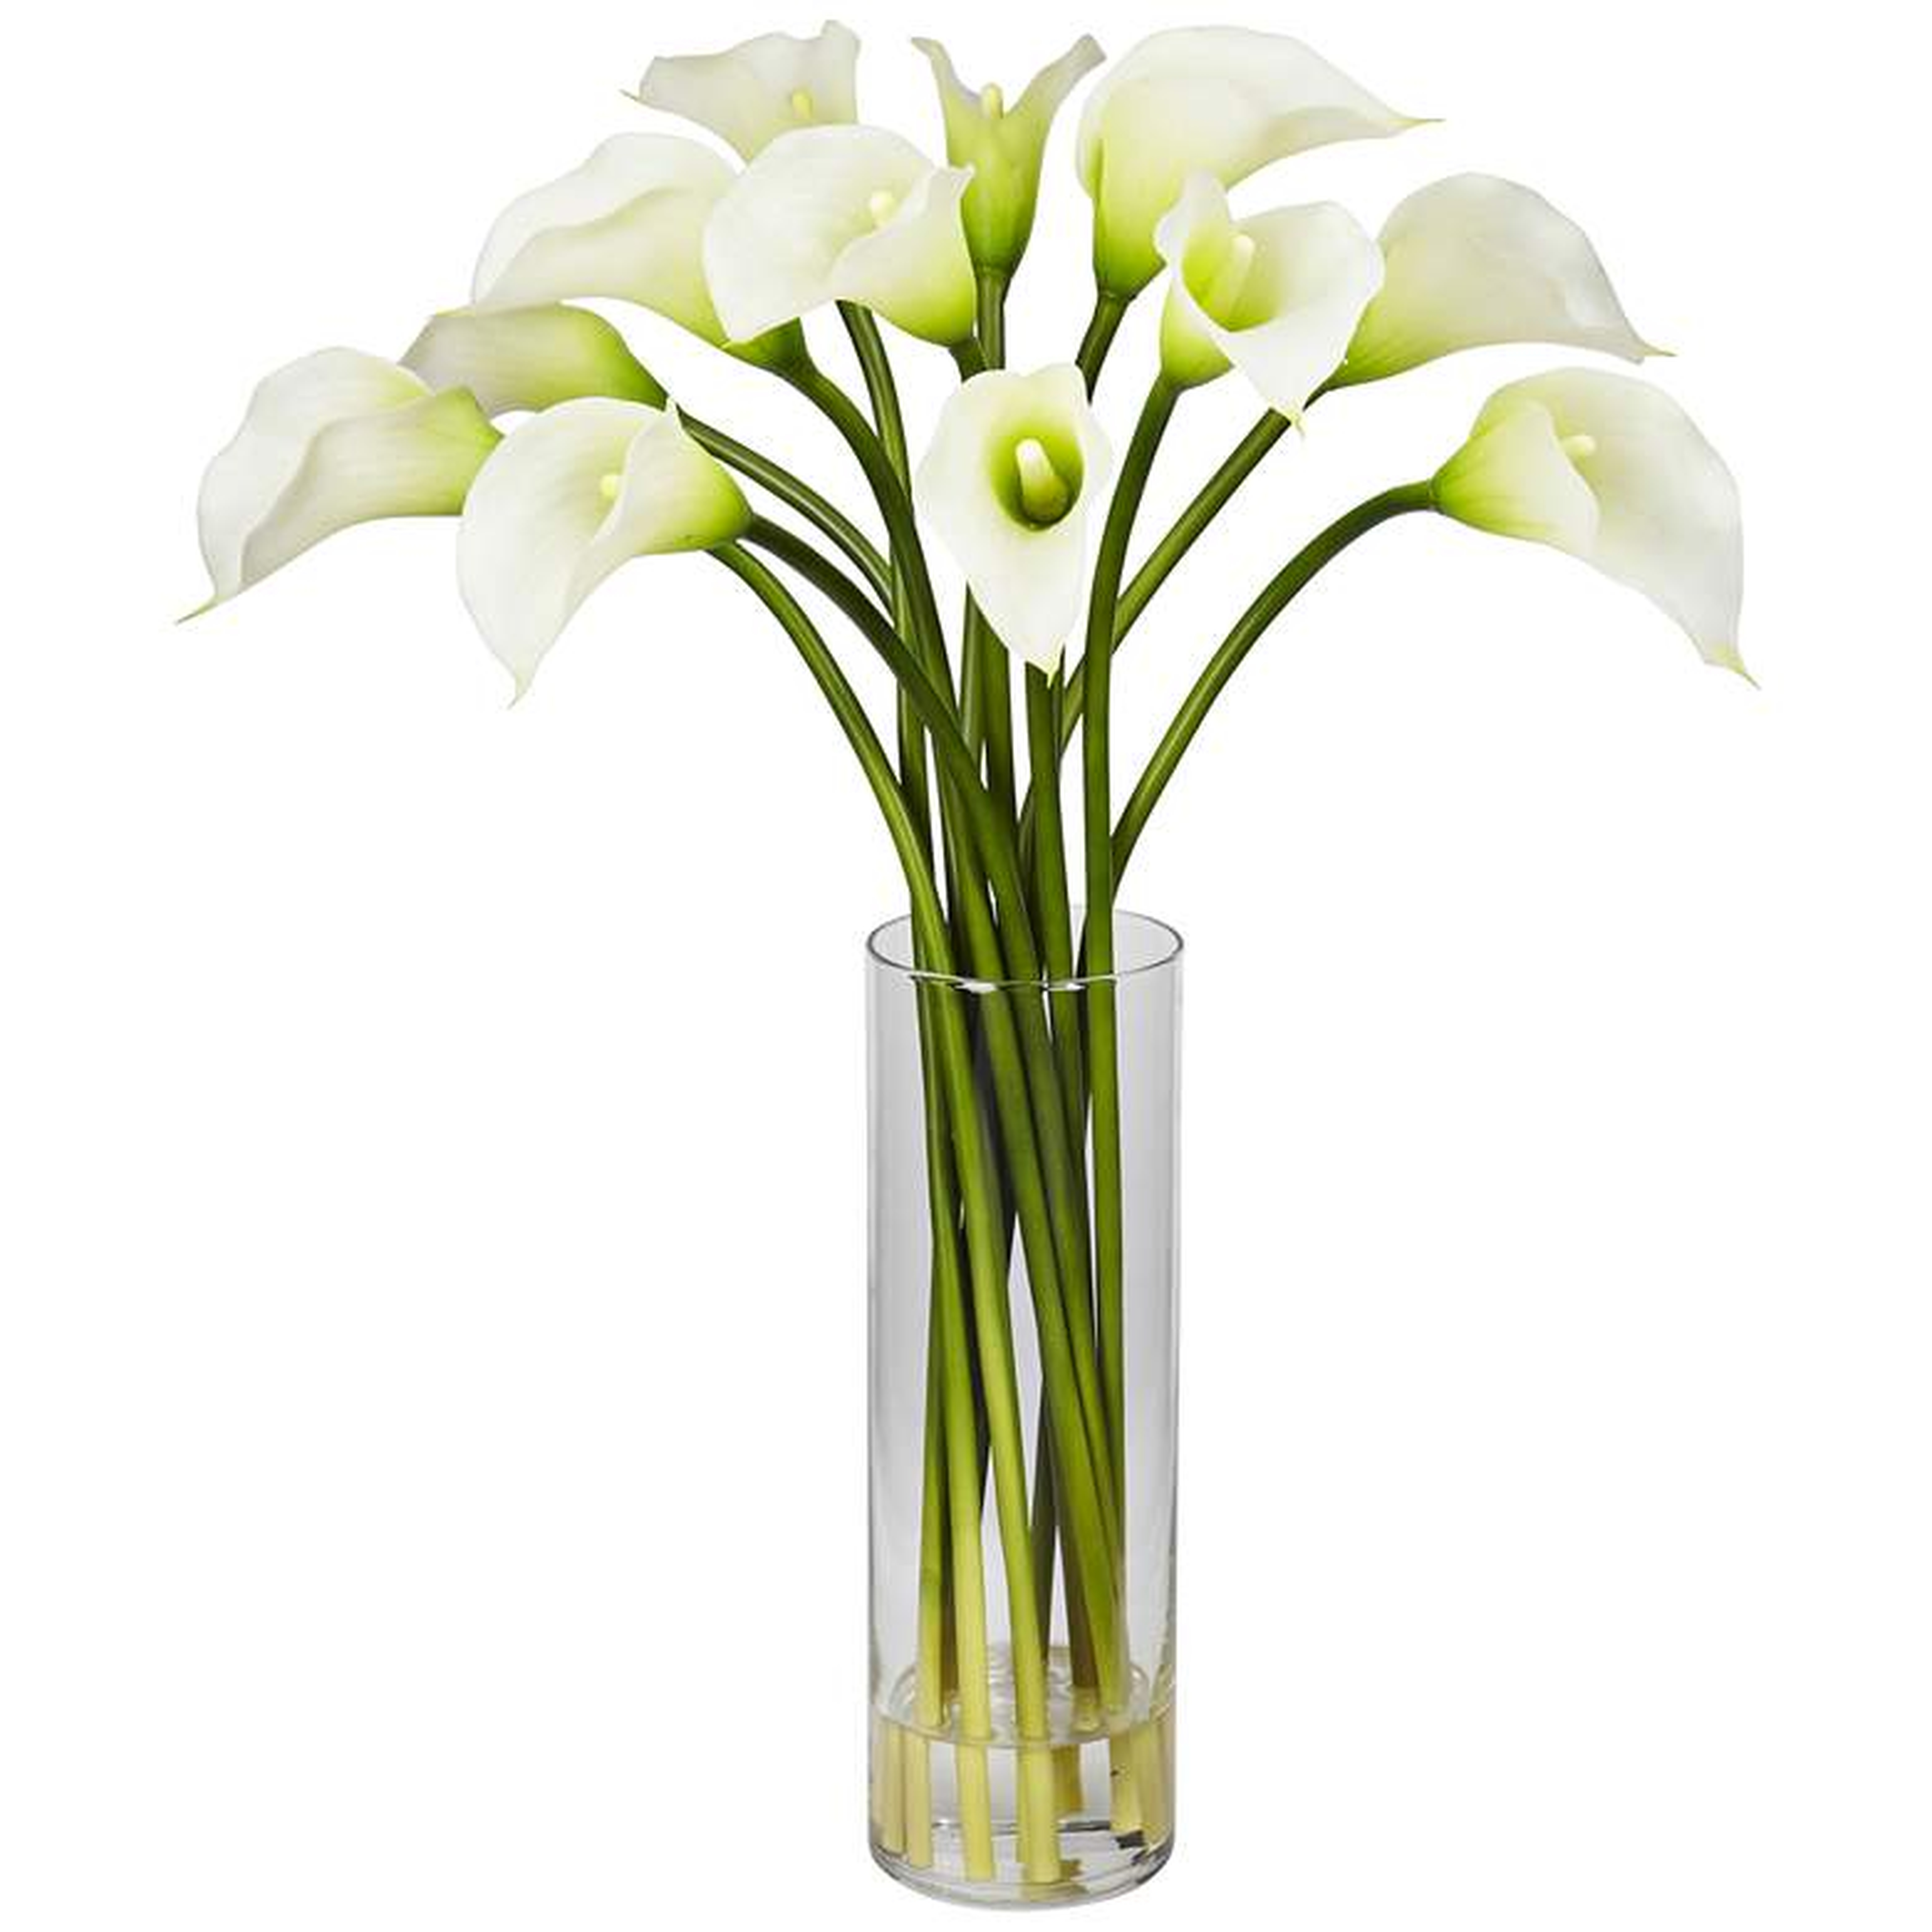 Cream Mini Calla Lily 20" High Faux Flowers in Glass Vase - Lamps Plus